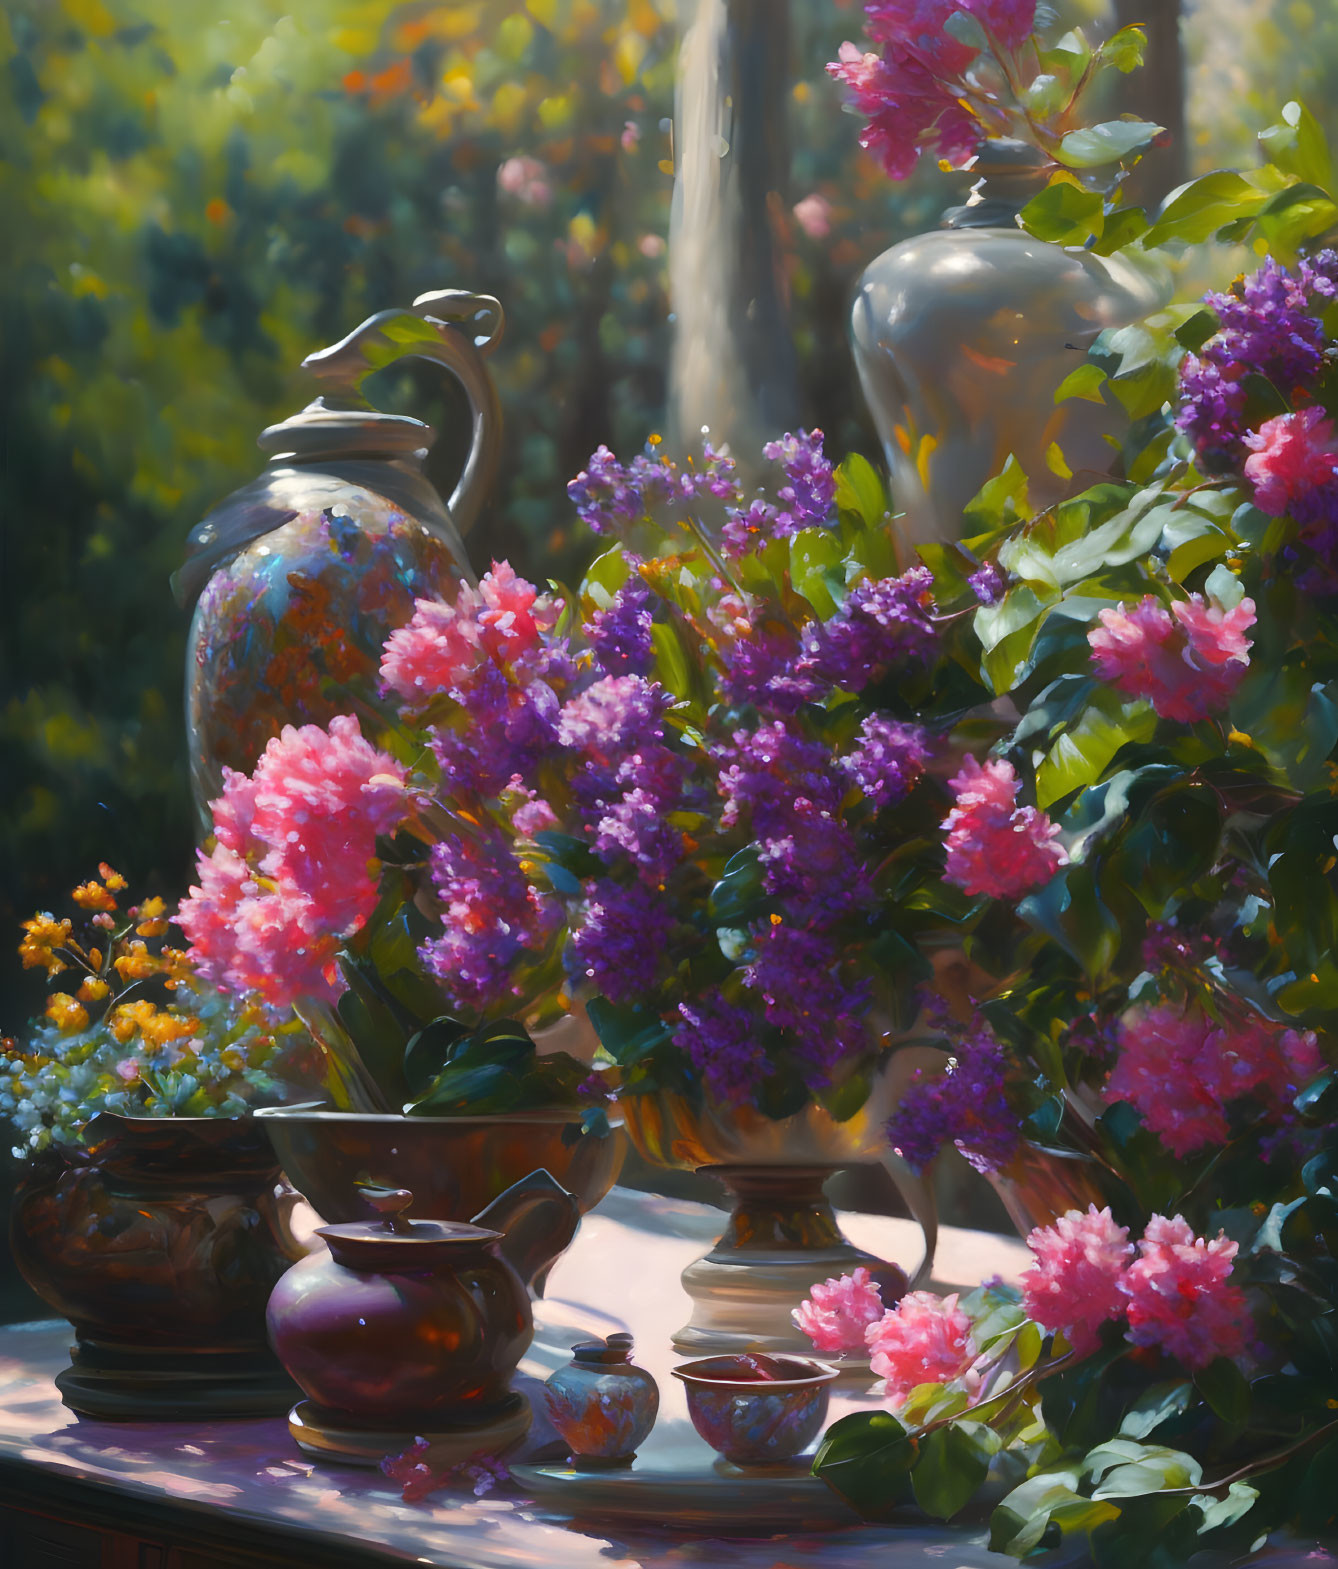 Vibrant bouquet of flowers on sunlit table with pitcher and vases